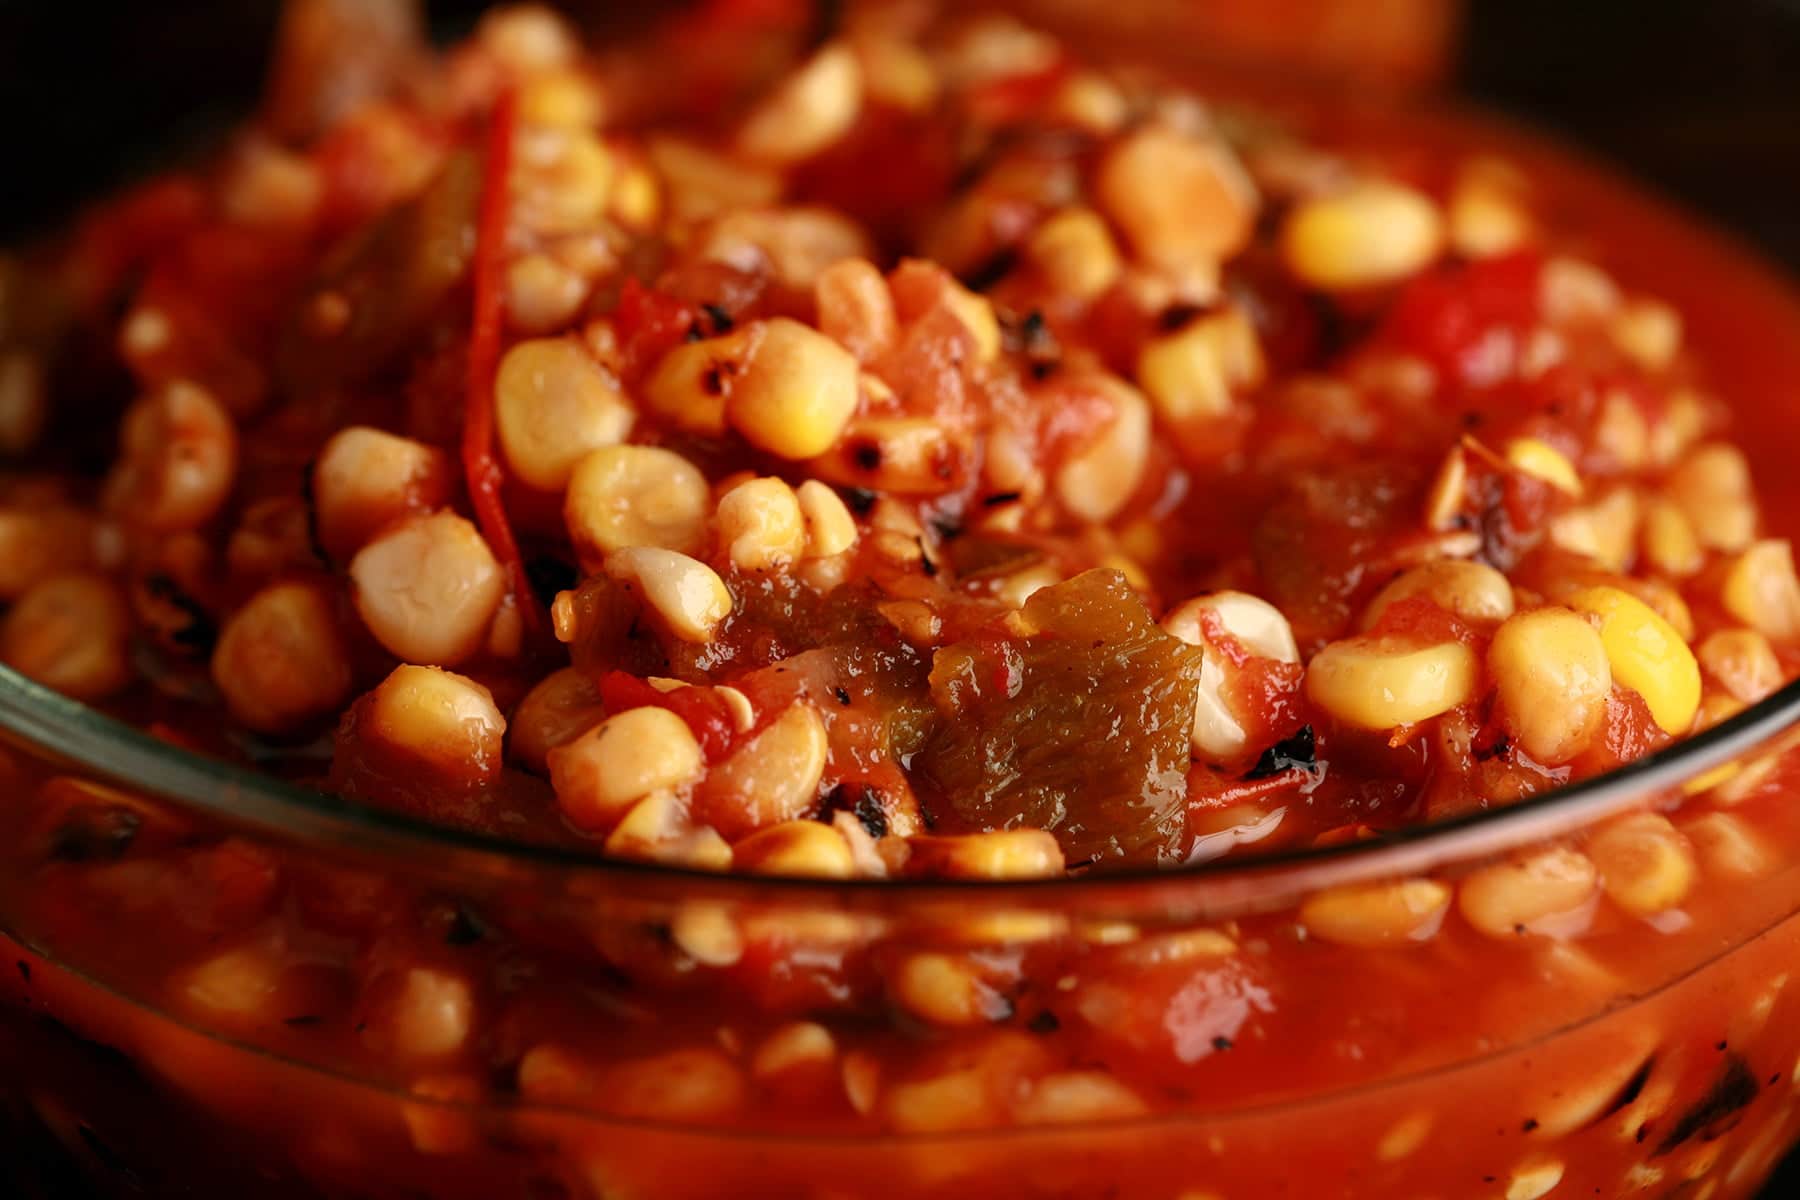 A close up view of roasted corn salsa for canning - corn salsa with tomatoes and peppers - in a glass bowl.